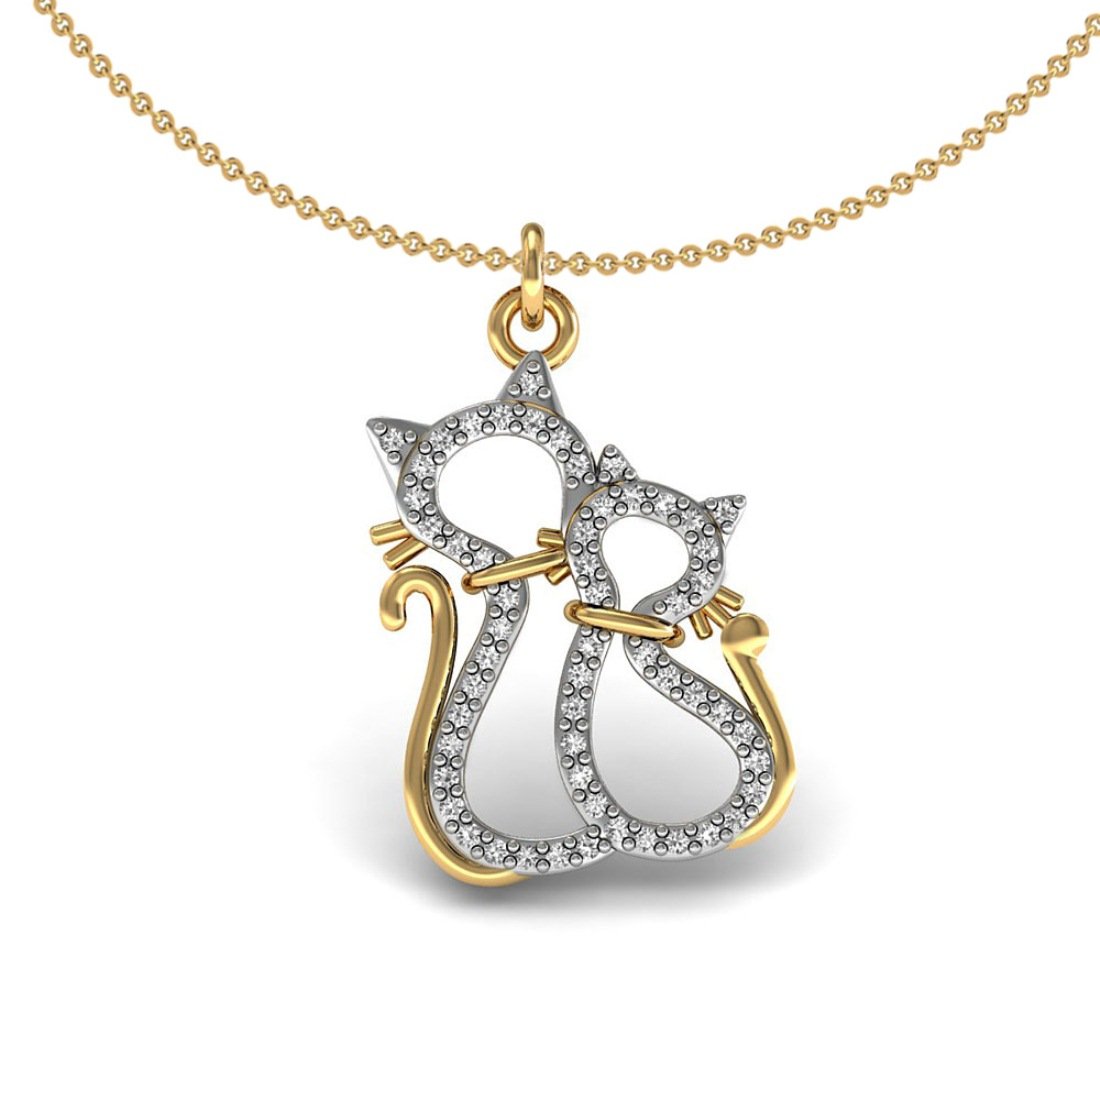 Two cat kids pendant set in 18k gold with diamond